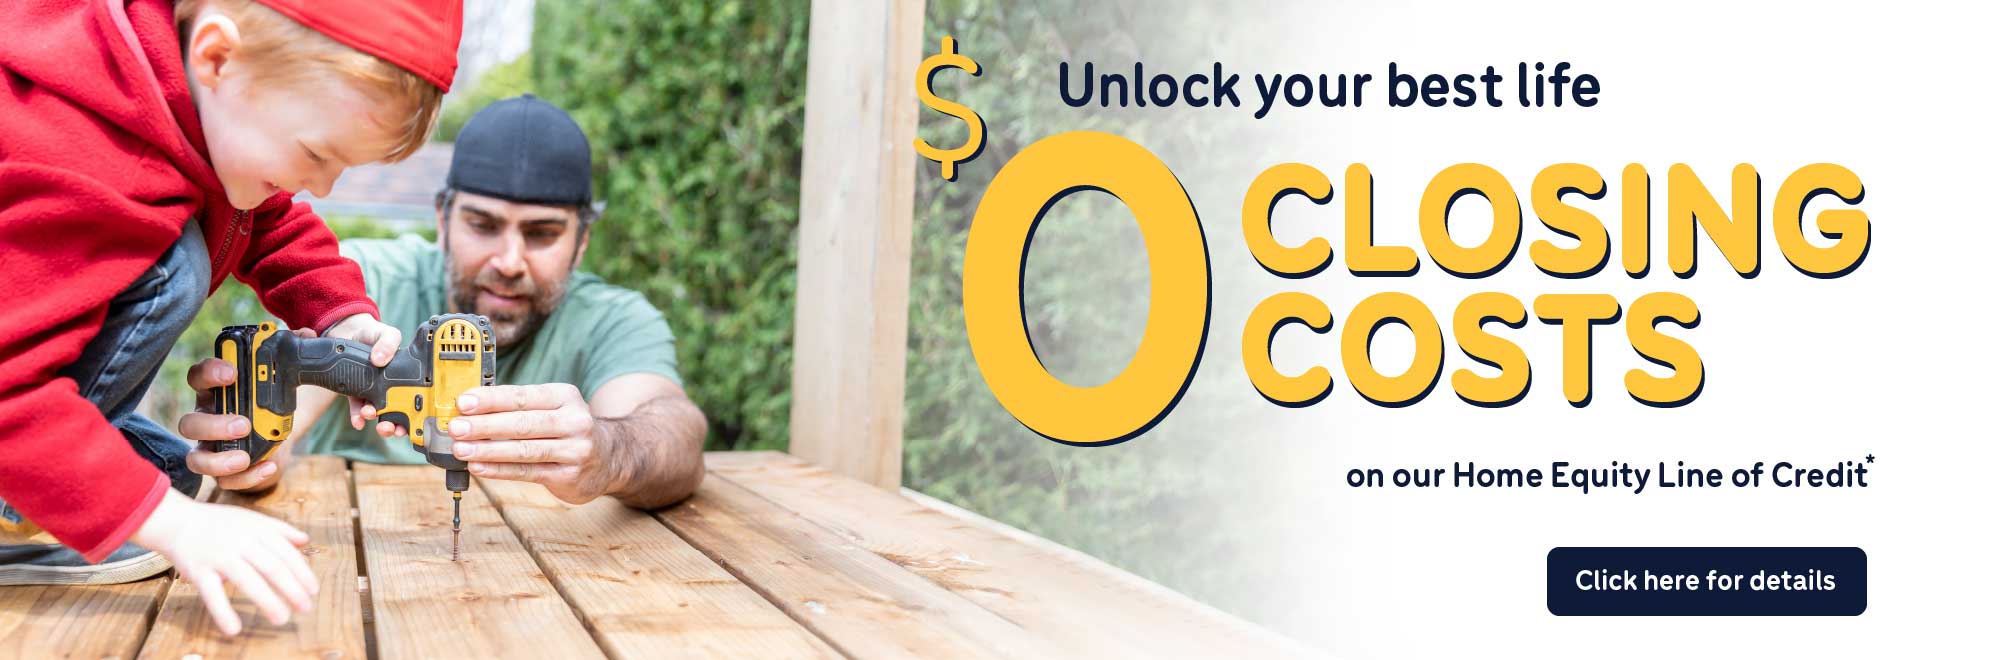 Learn how you can unlock your best life with a $0 Closing Cost Home Equity Line of Credit